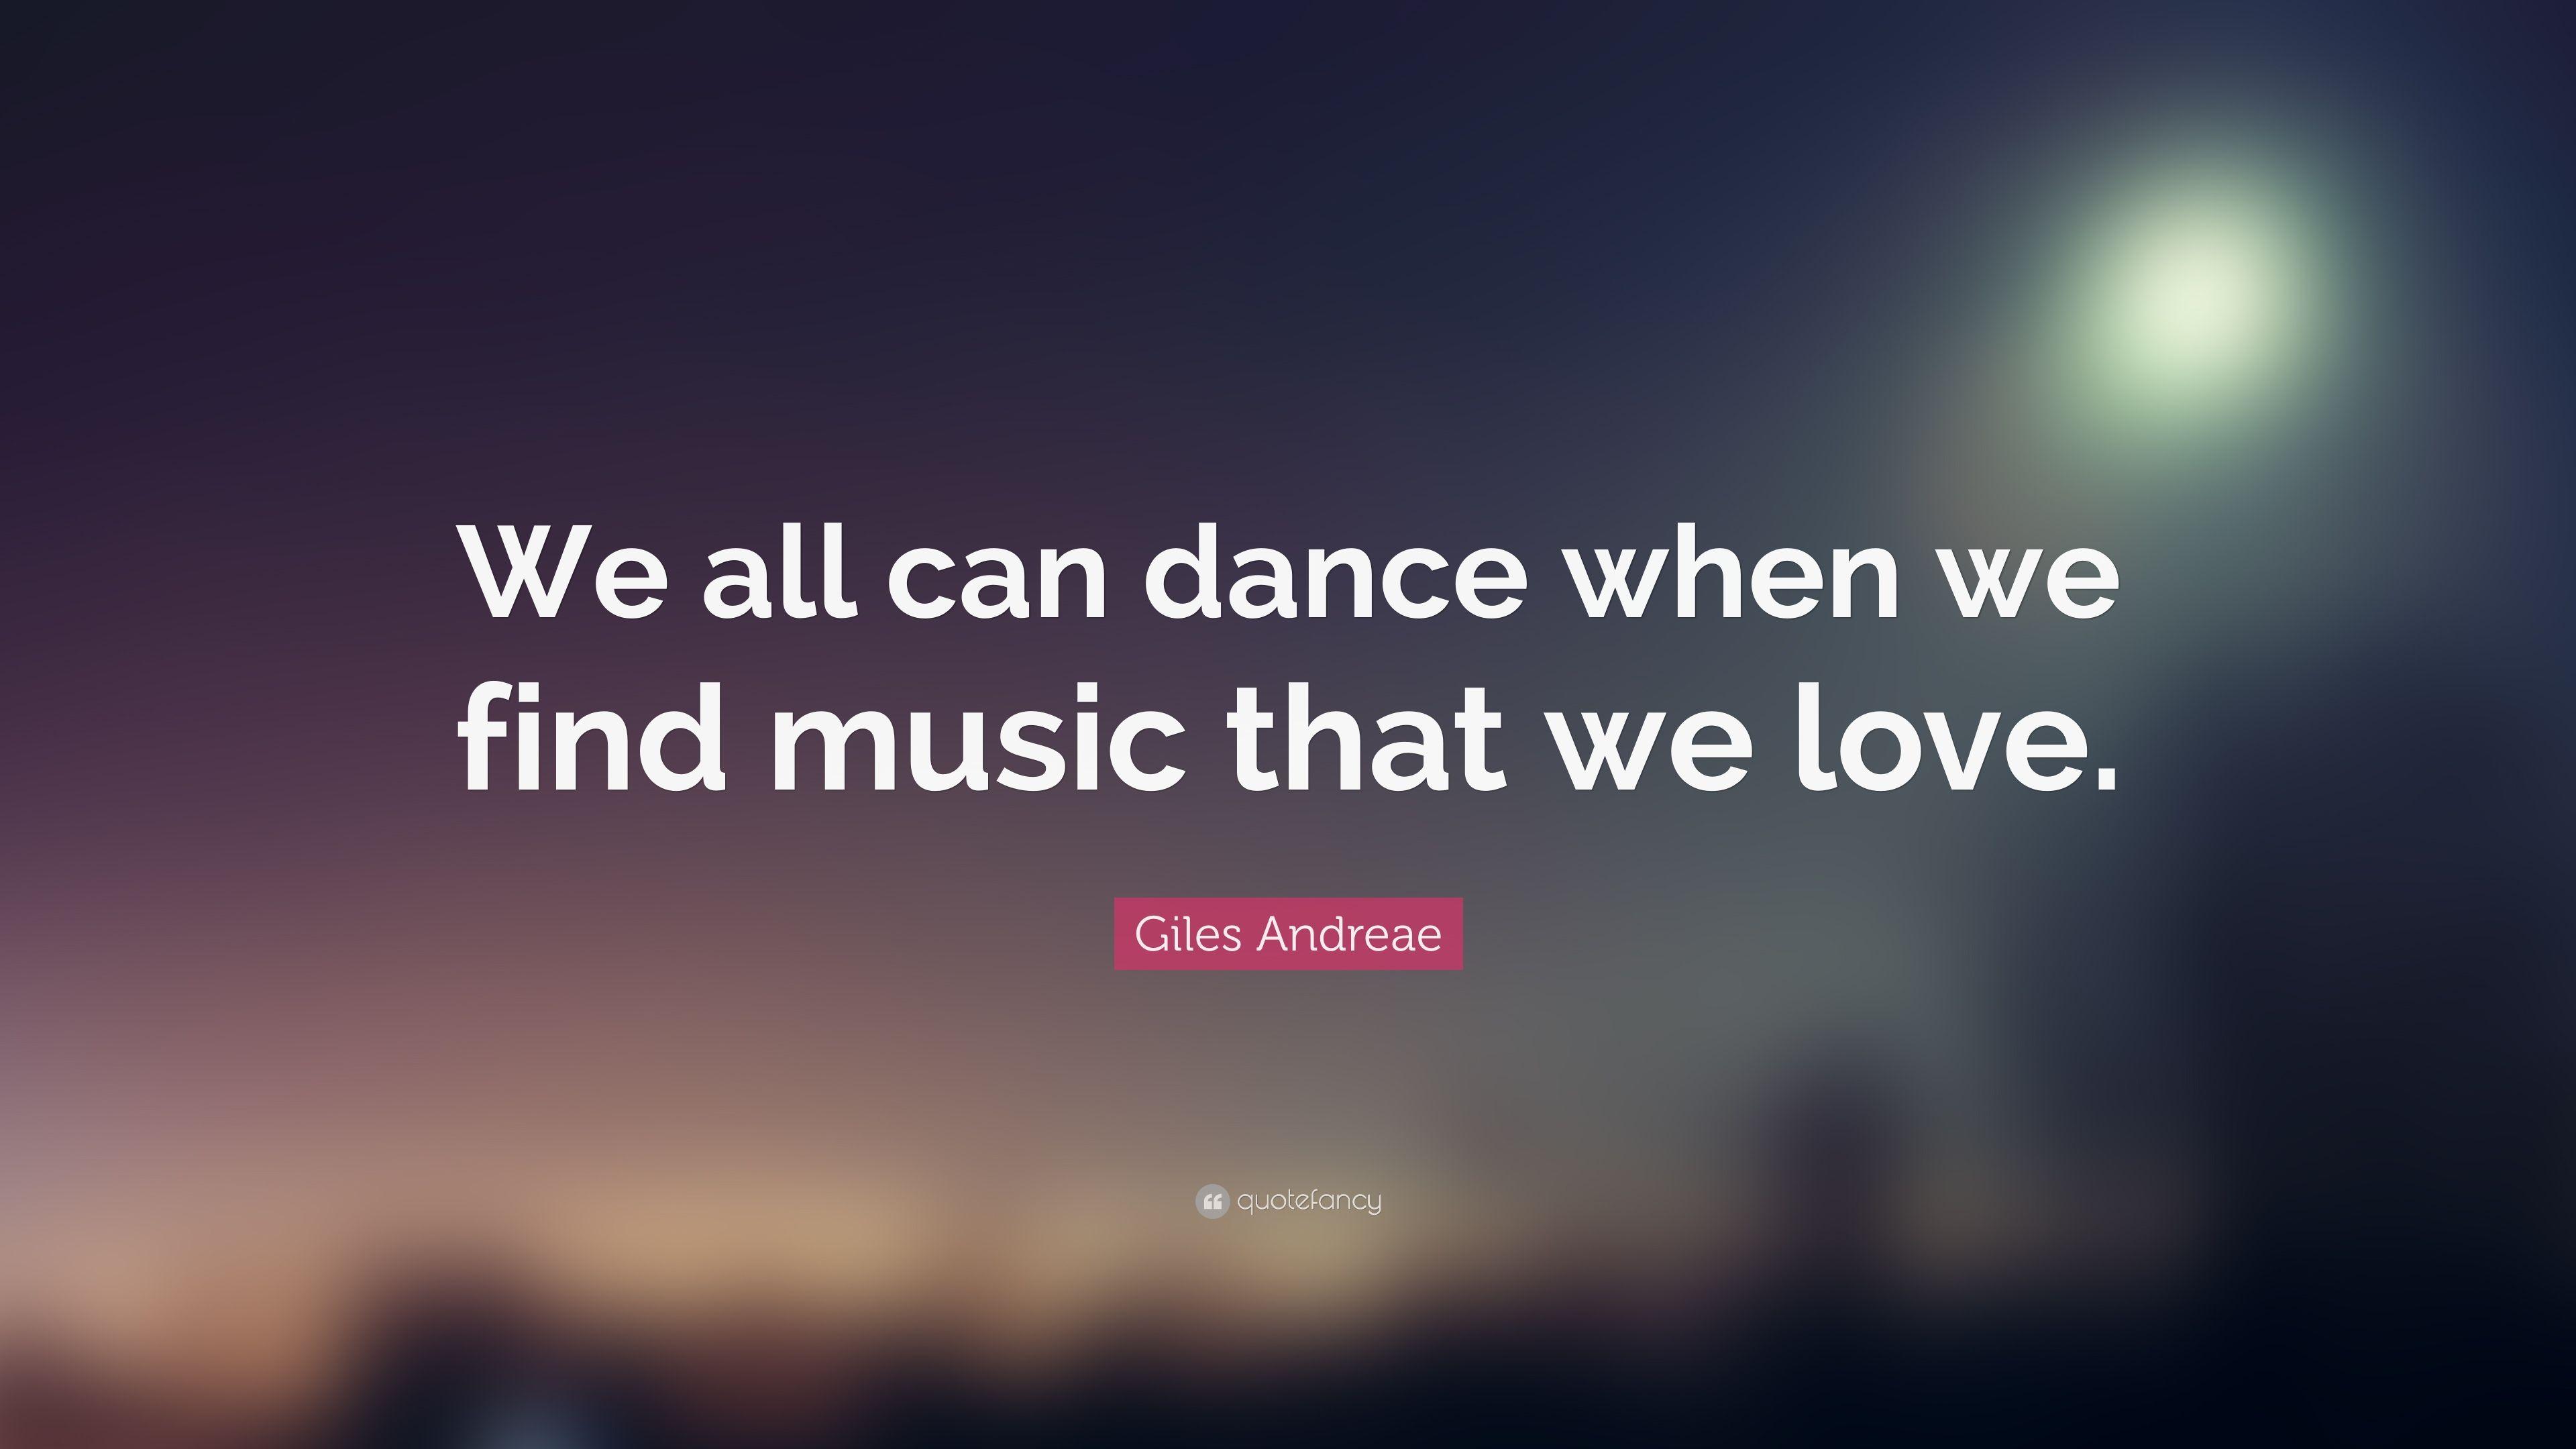 Giles Andreae Quote: “We all can dance when we find music that we